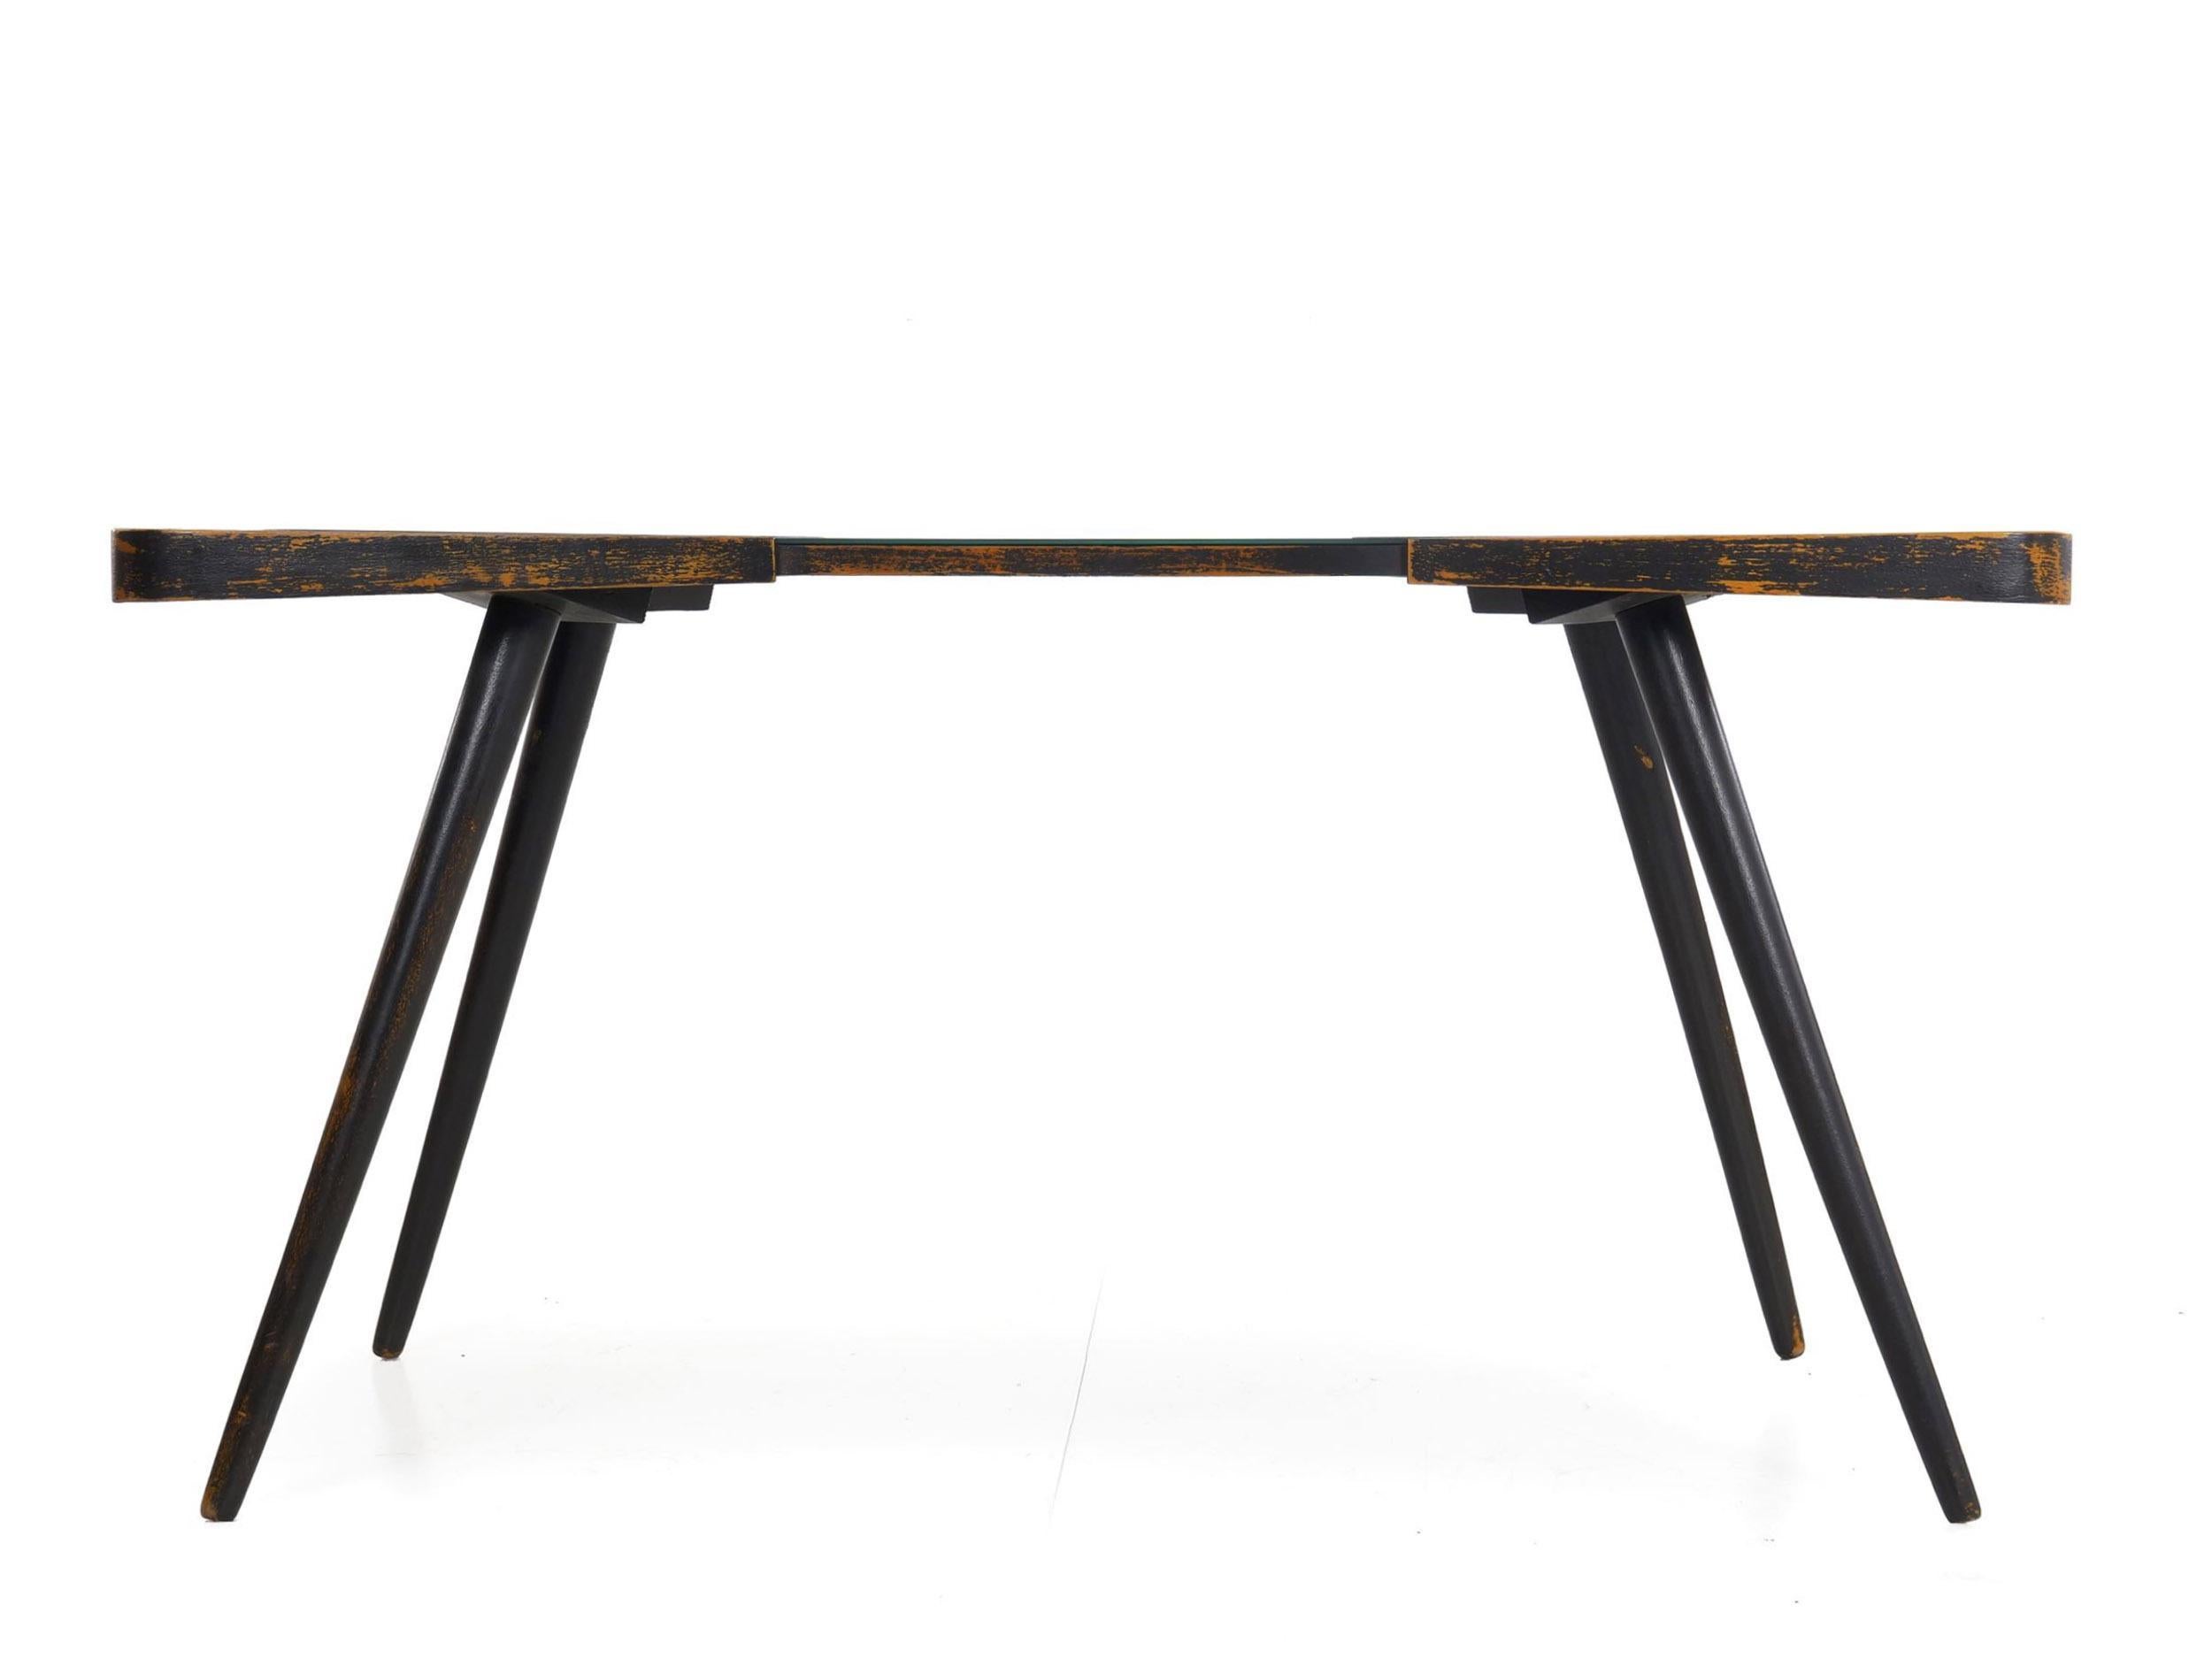 Vintage Ebonized Splay-Leg Cocktail Coffee Table with Black Glass, 20th Century For Sale 1